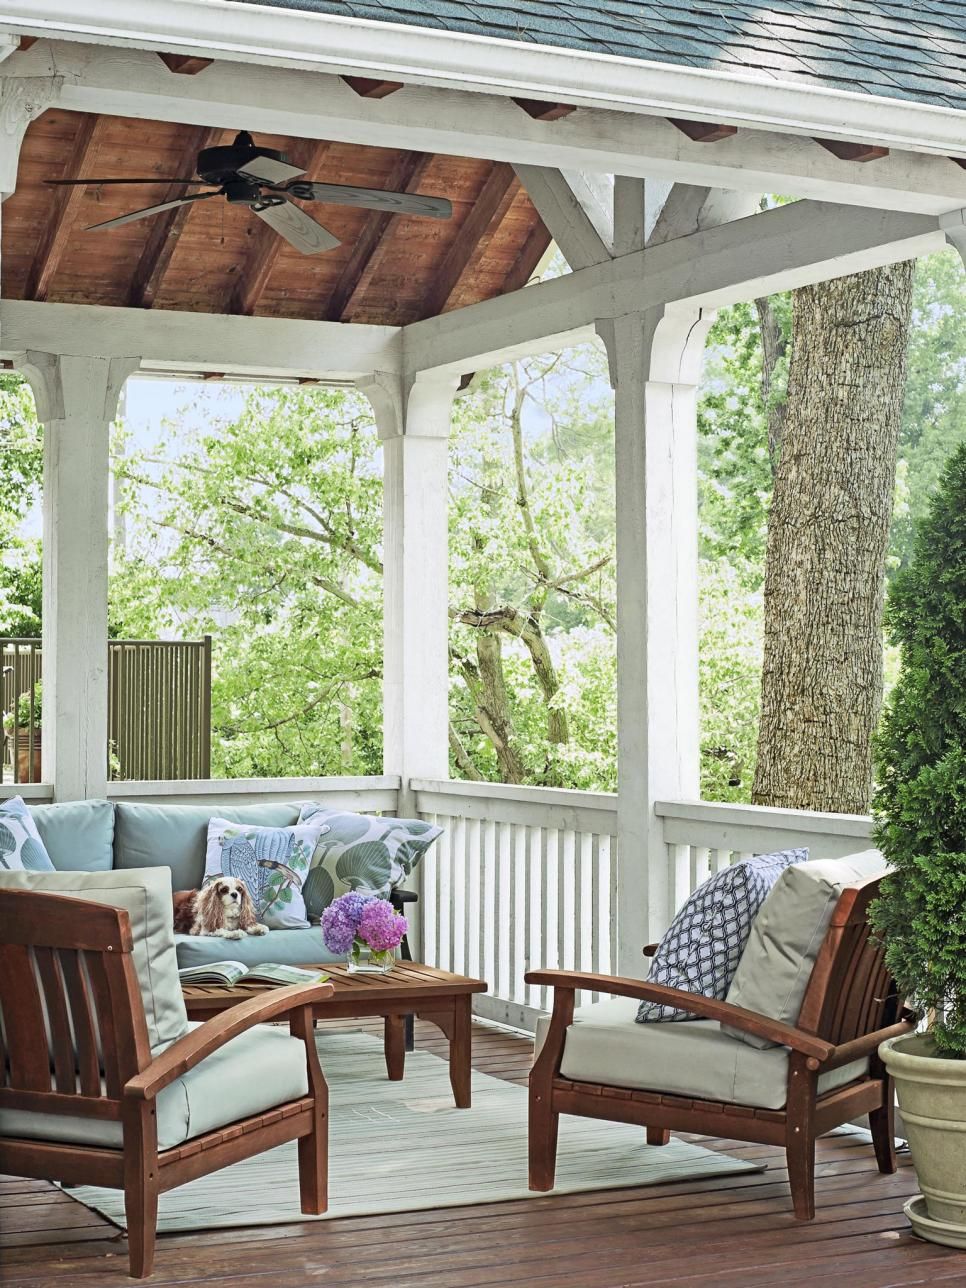 Creative Ideas for a Beautiful Covered Porch